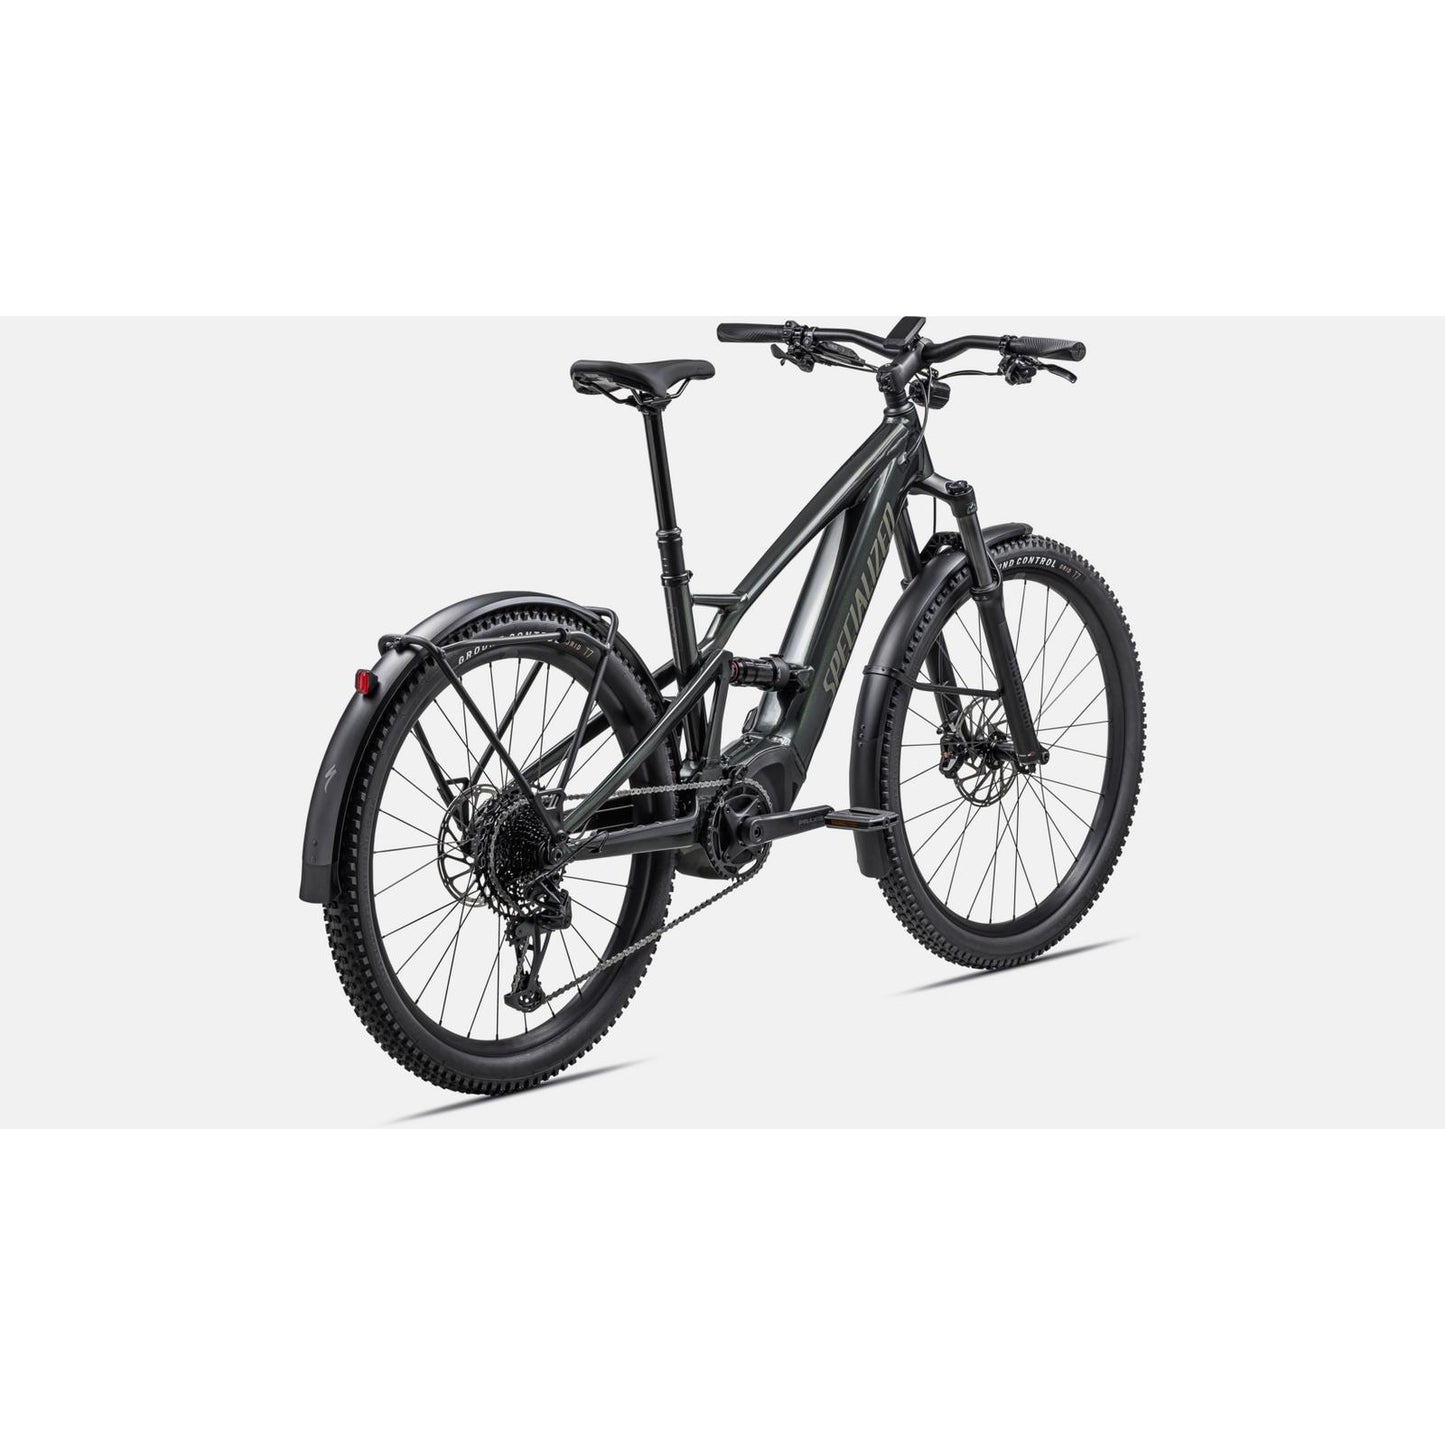 Specialized Turbo Tero X 5.0 Active Electric Bike - Bikes - Bicycle Warehouse